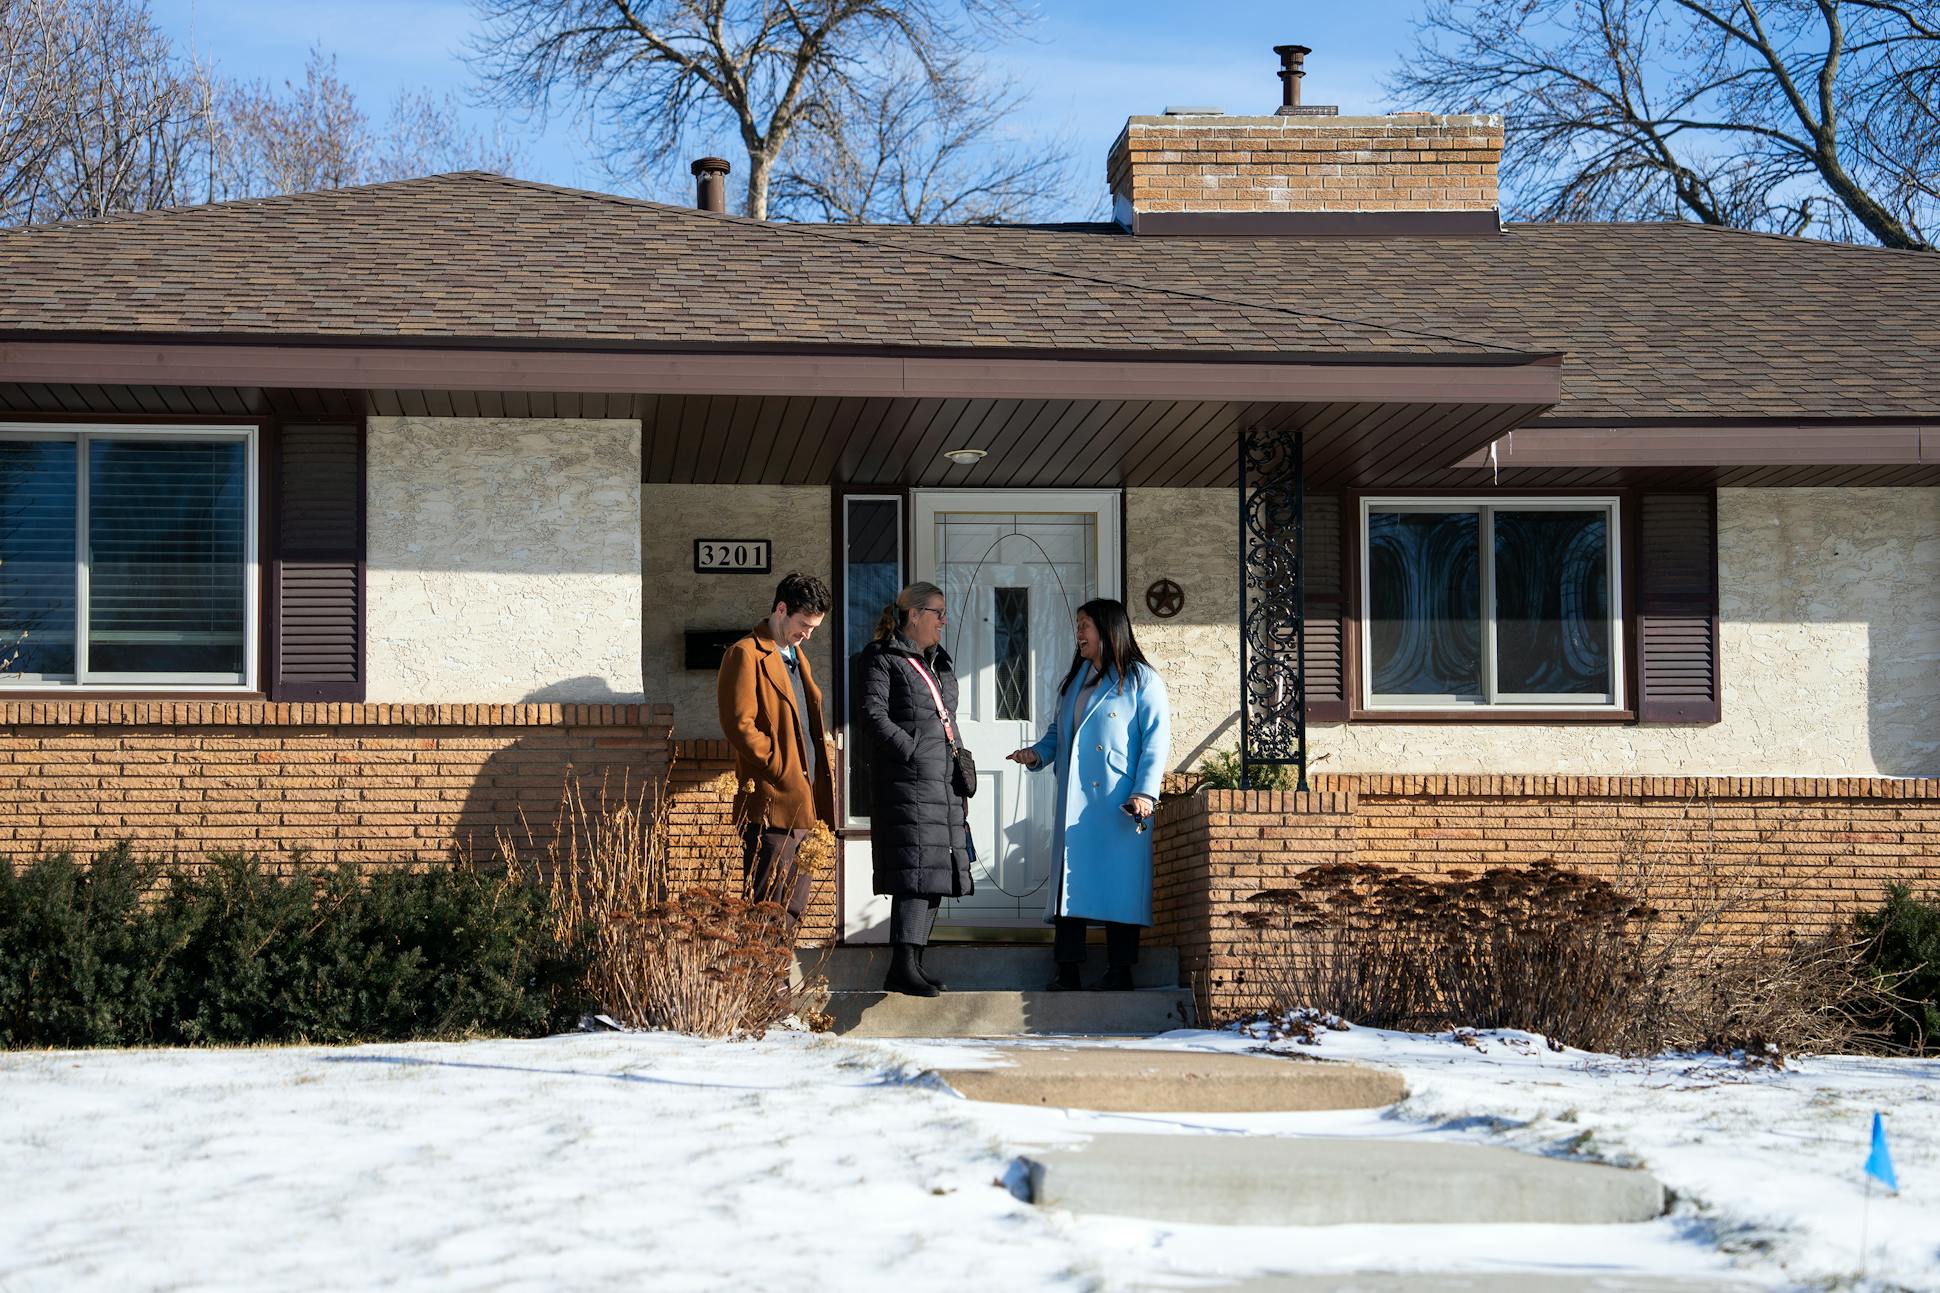 Libby Jacobson, right, and Kyle Staunton walked through their new house with real estate agent Kathy Borys in St. Anthony. “It has bigger lots and houses with more space,” Jacobson said.